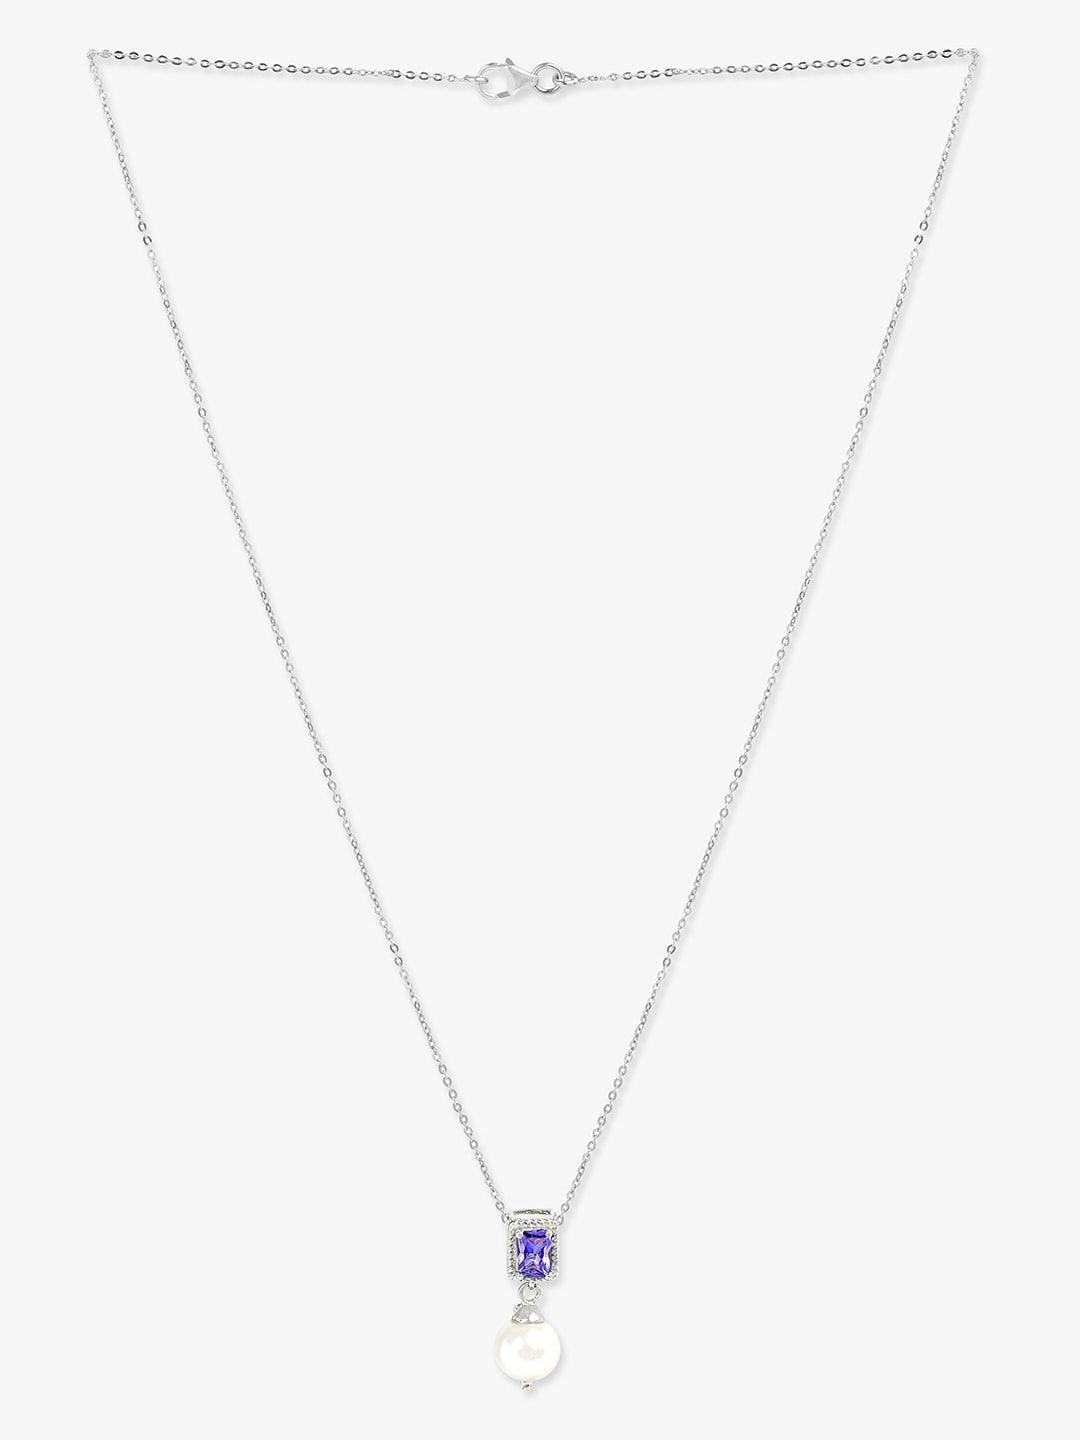 mikoto by fablestreet women purple & white rhodium-plated cubic zirconia chain